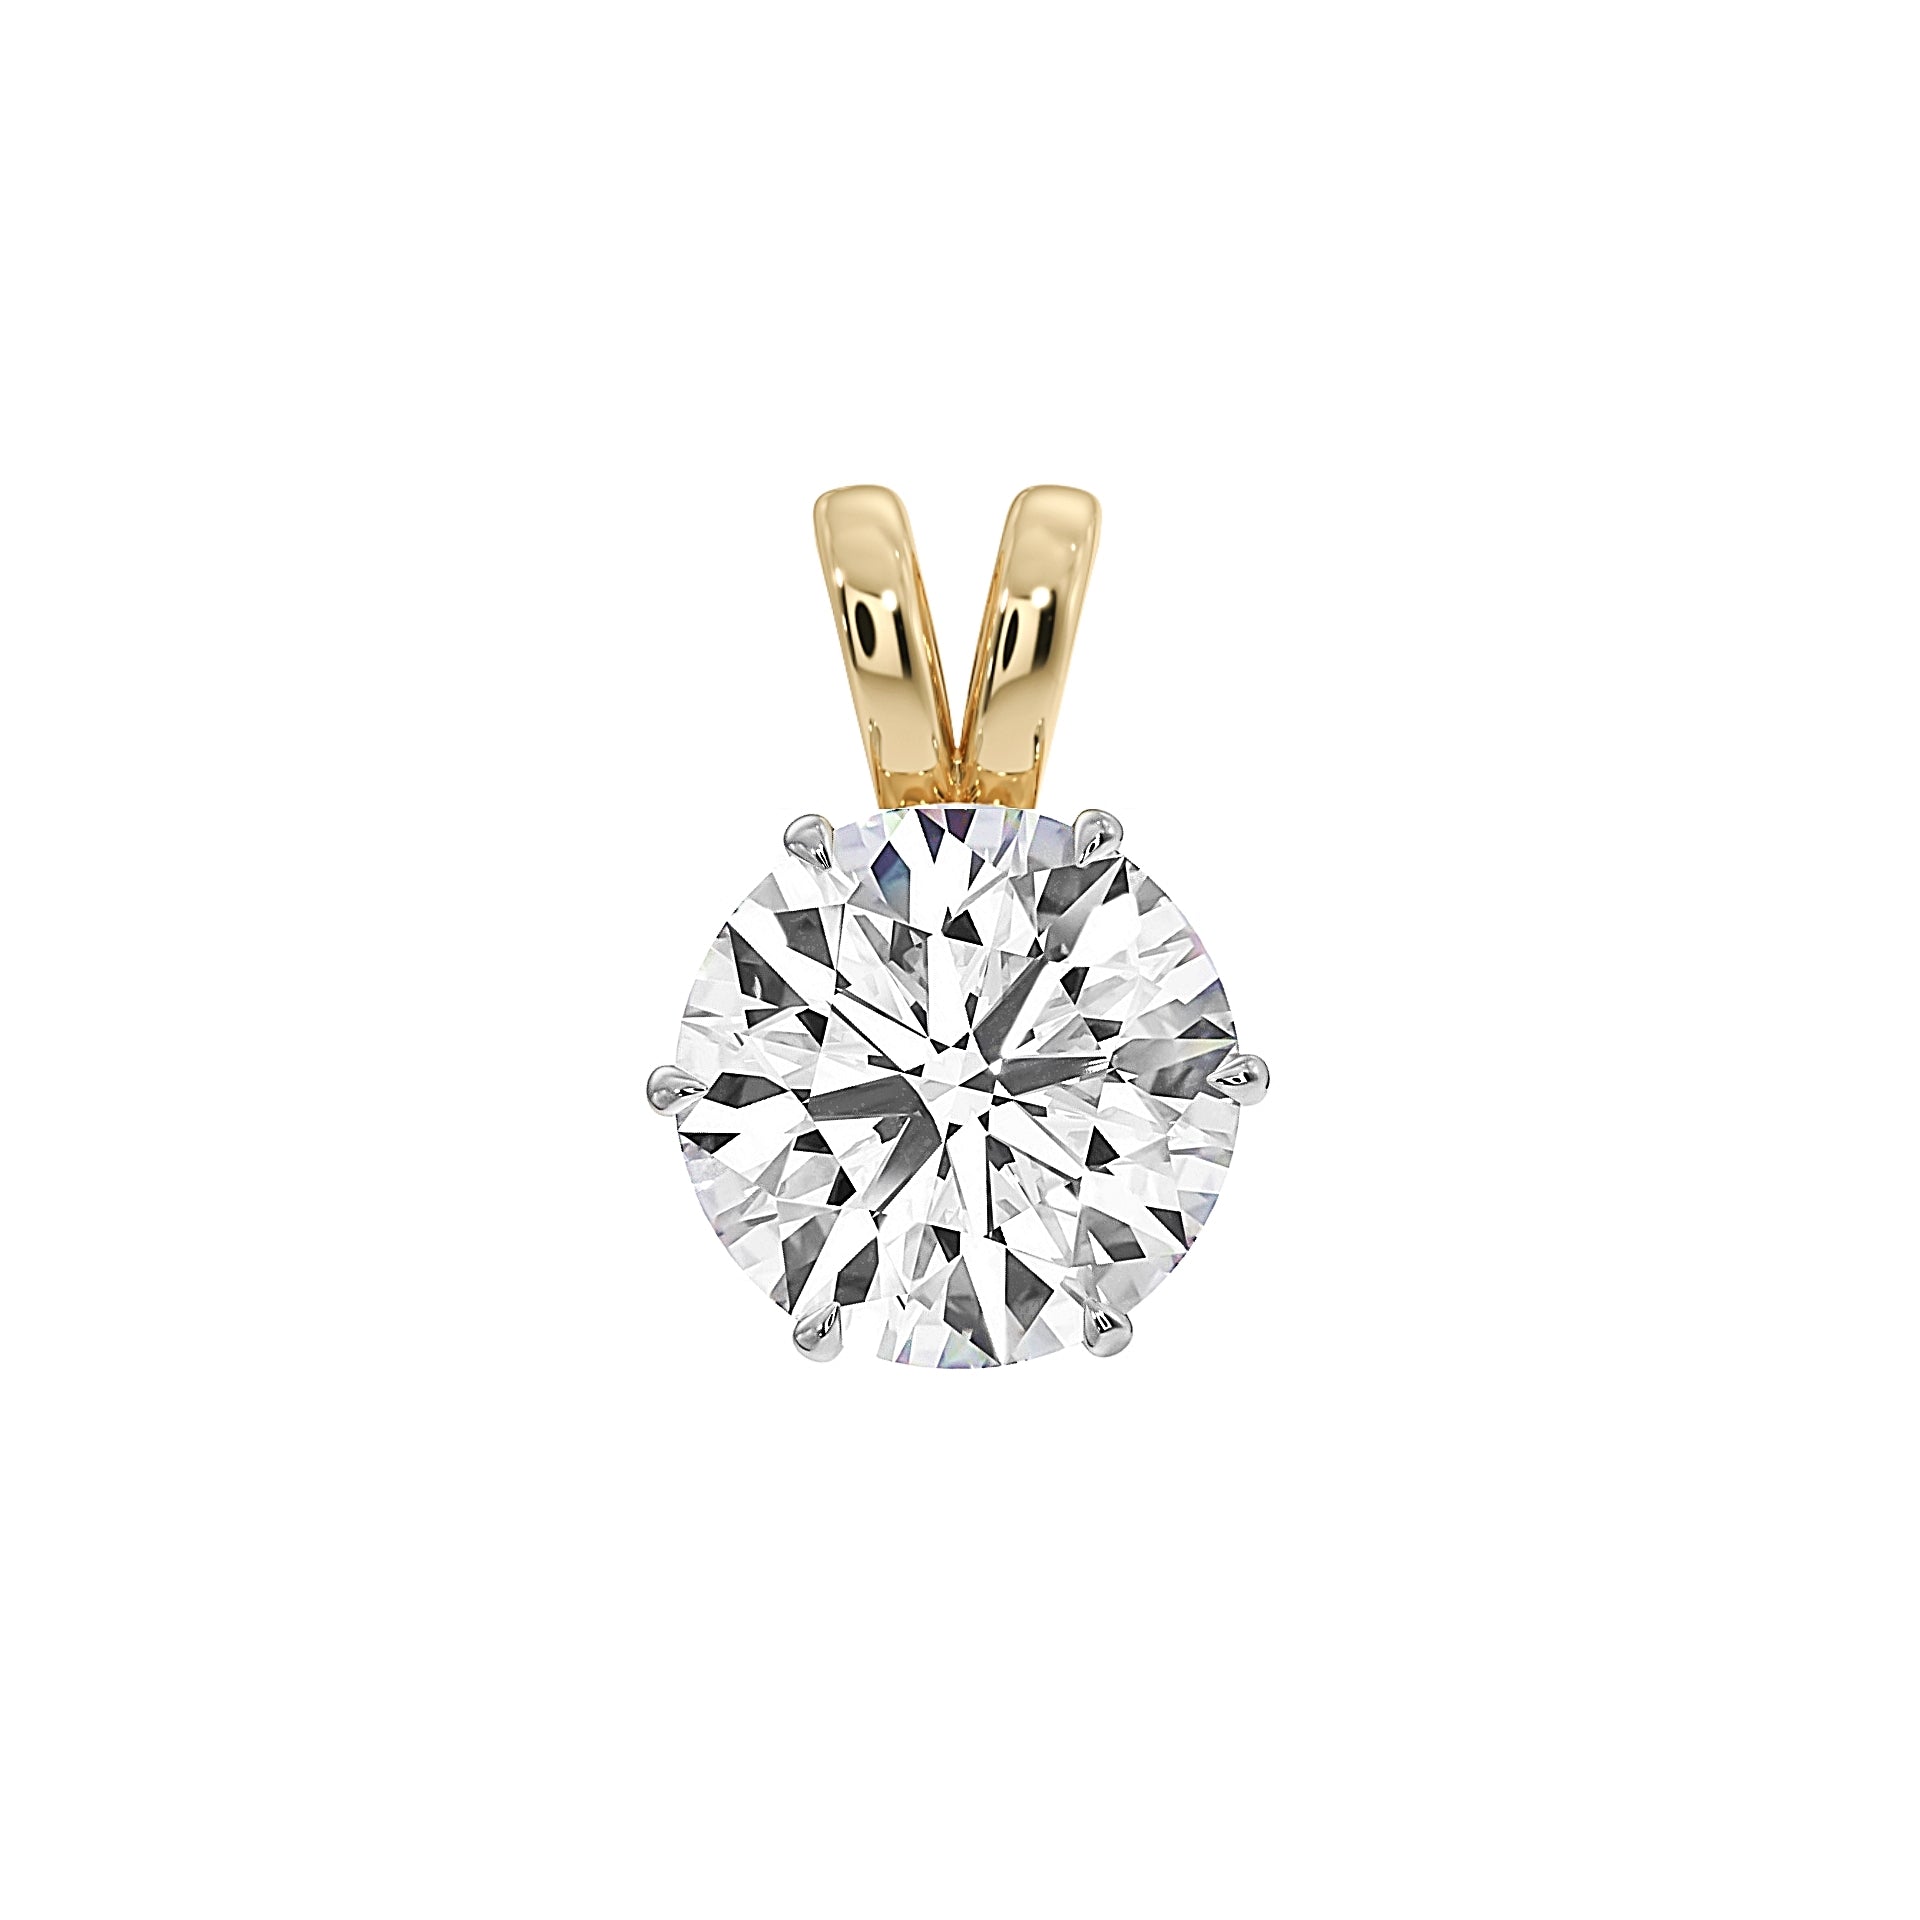 Front view of MYZA 2 carat IGI certified lab-grown diamond Pendant for women delicately set in secure six-prong settings crafted in 18kt hallmark yellow gold.